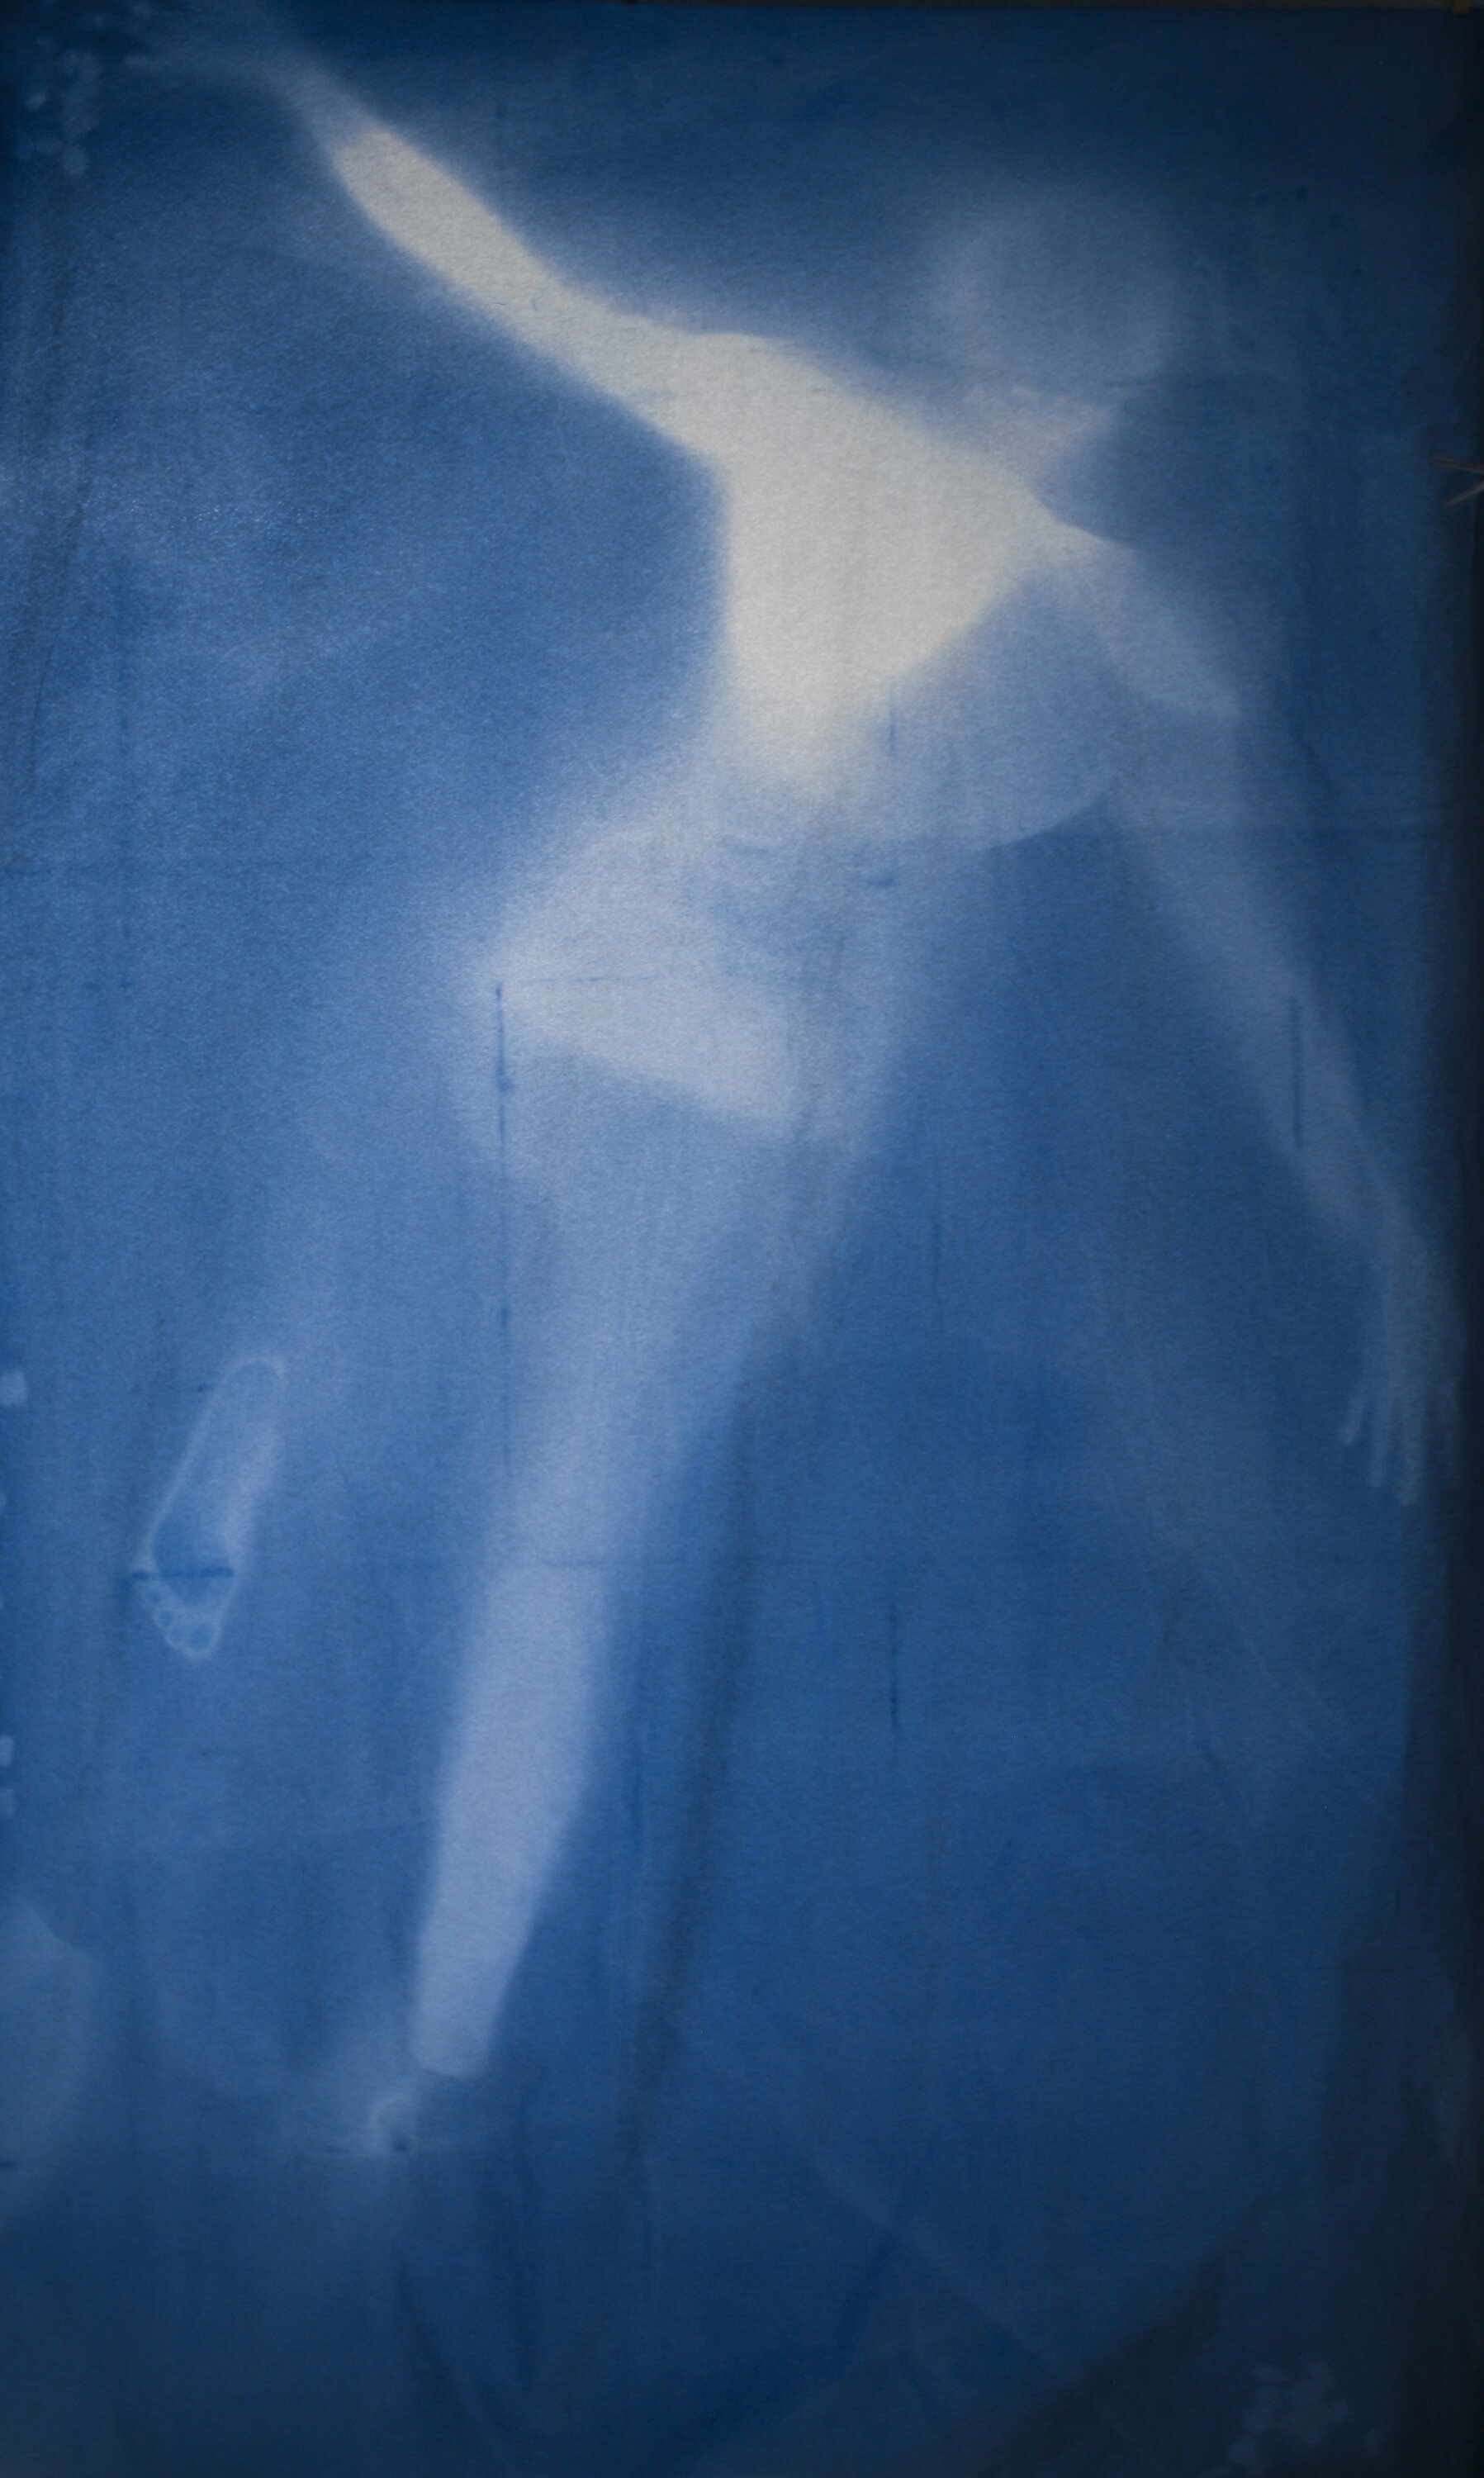  Han Qin,  Ethereal Evolving 4 , 2018. Cyanotype on paper, 82 x 47 inches ©Han Qin, courtesy Fou Gallery 